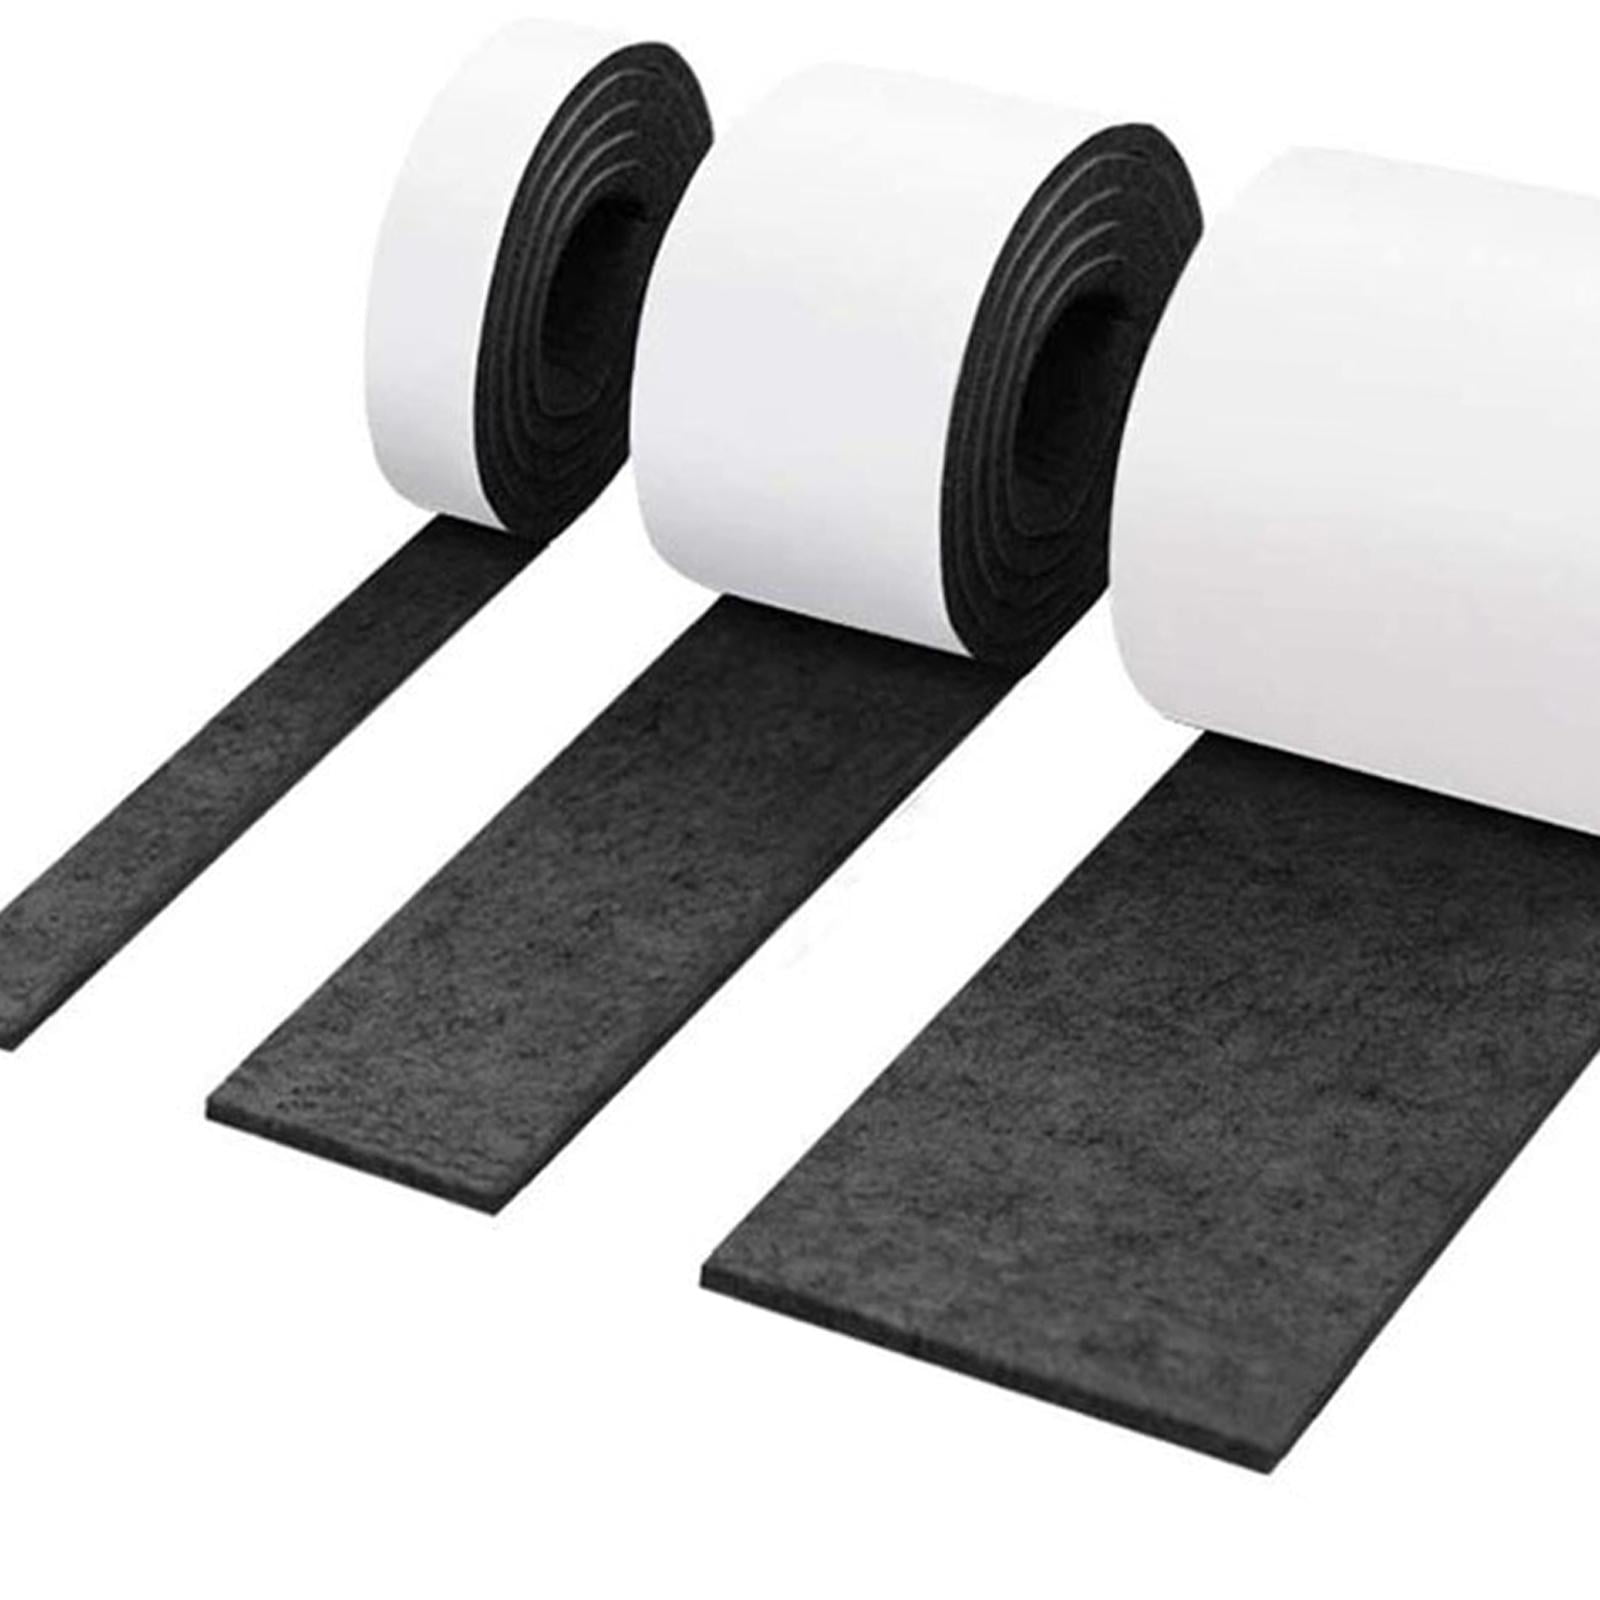 Black Felt Stripping, Adhesive Backed 1 Wide x .5mm (.02”) Thick, 50' Roll  - 3 Roll Minimum - The Felt Company